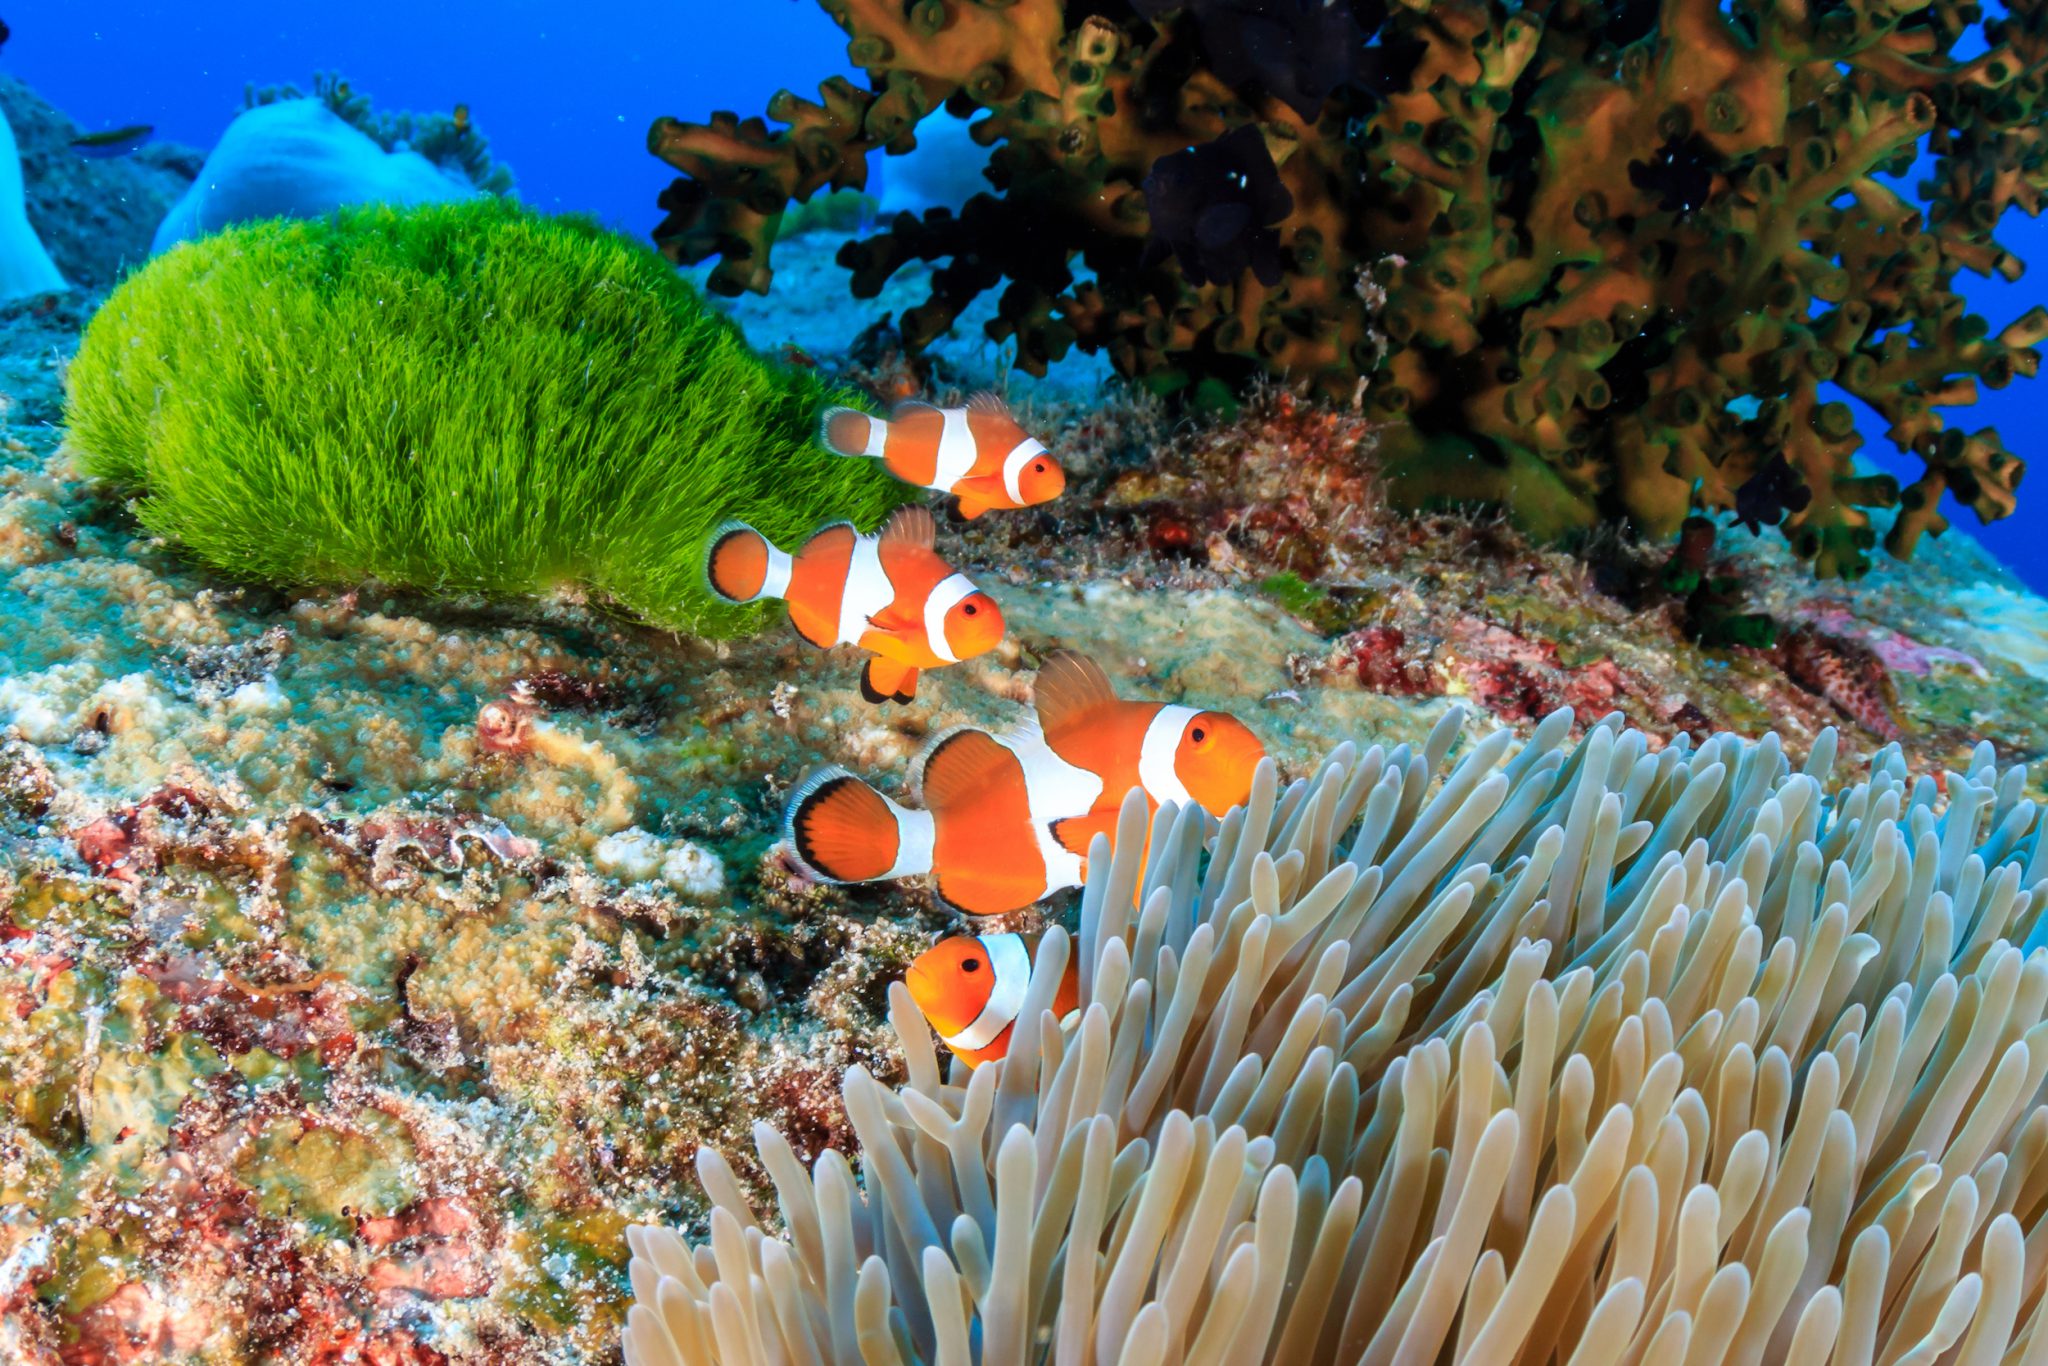 A group of anemonefish living on a coral reef in the Similan Islands, one of the best places to scuba dive in February